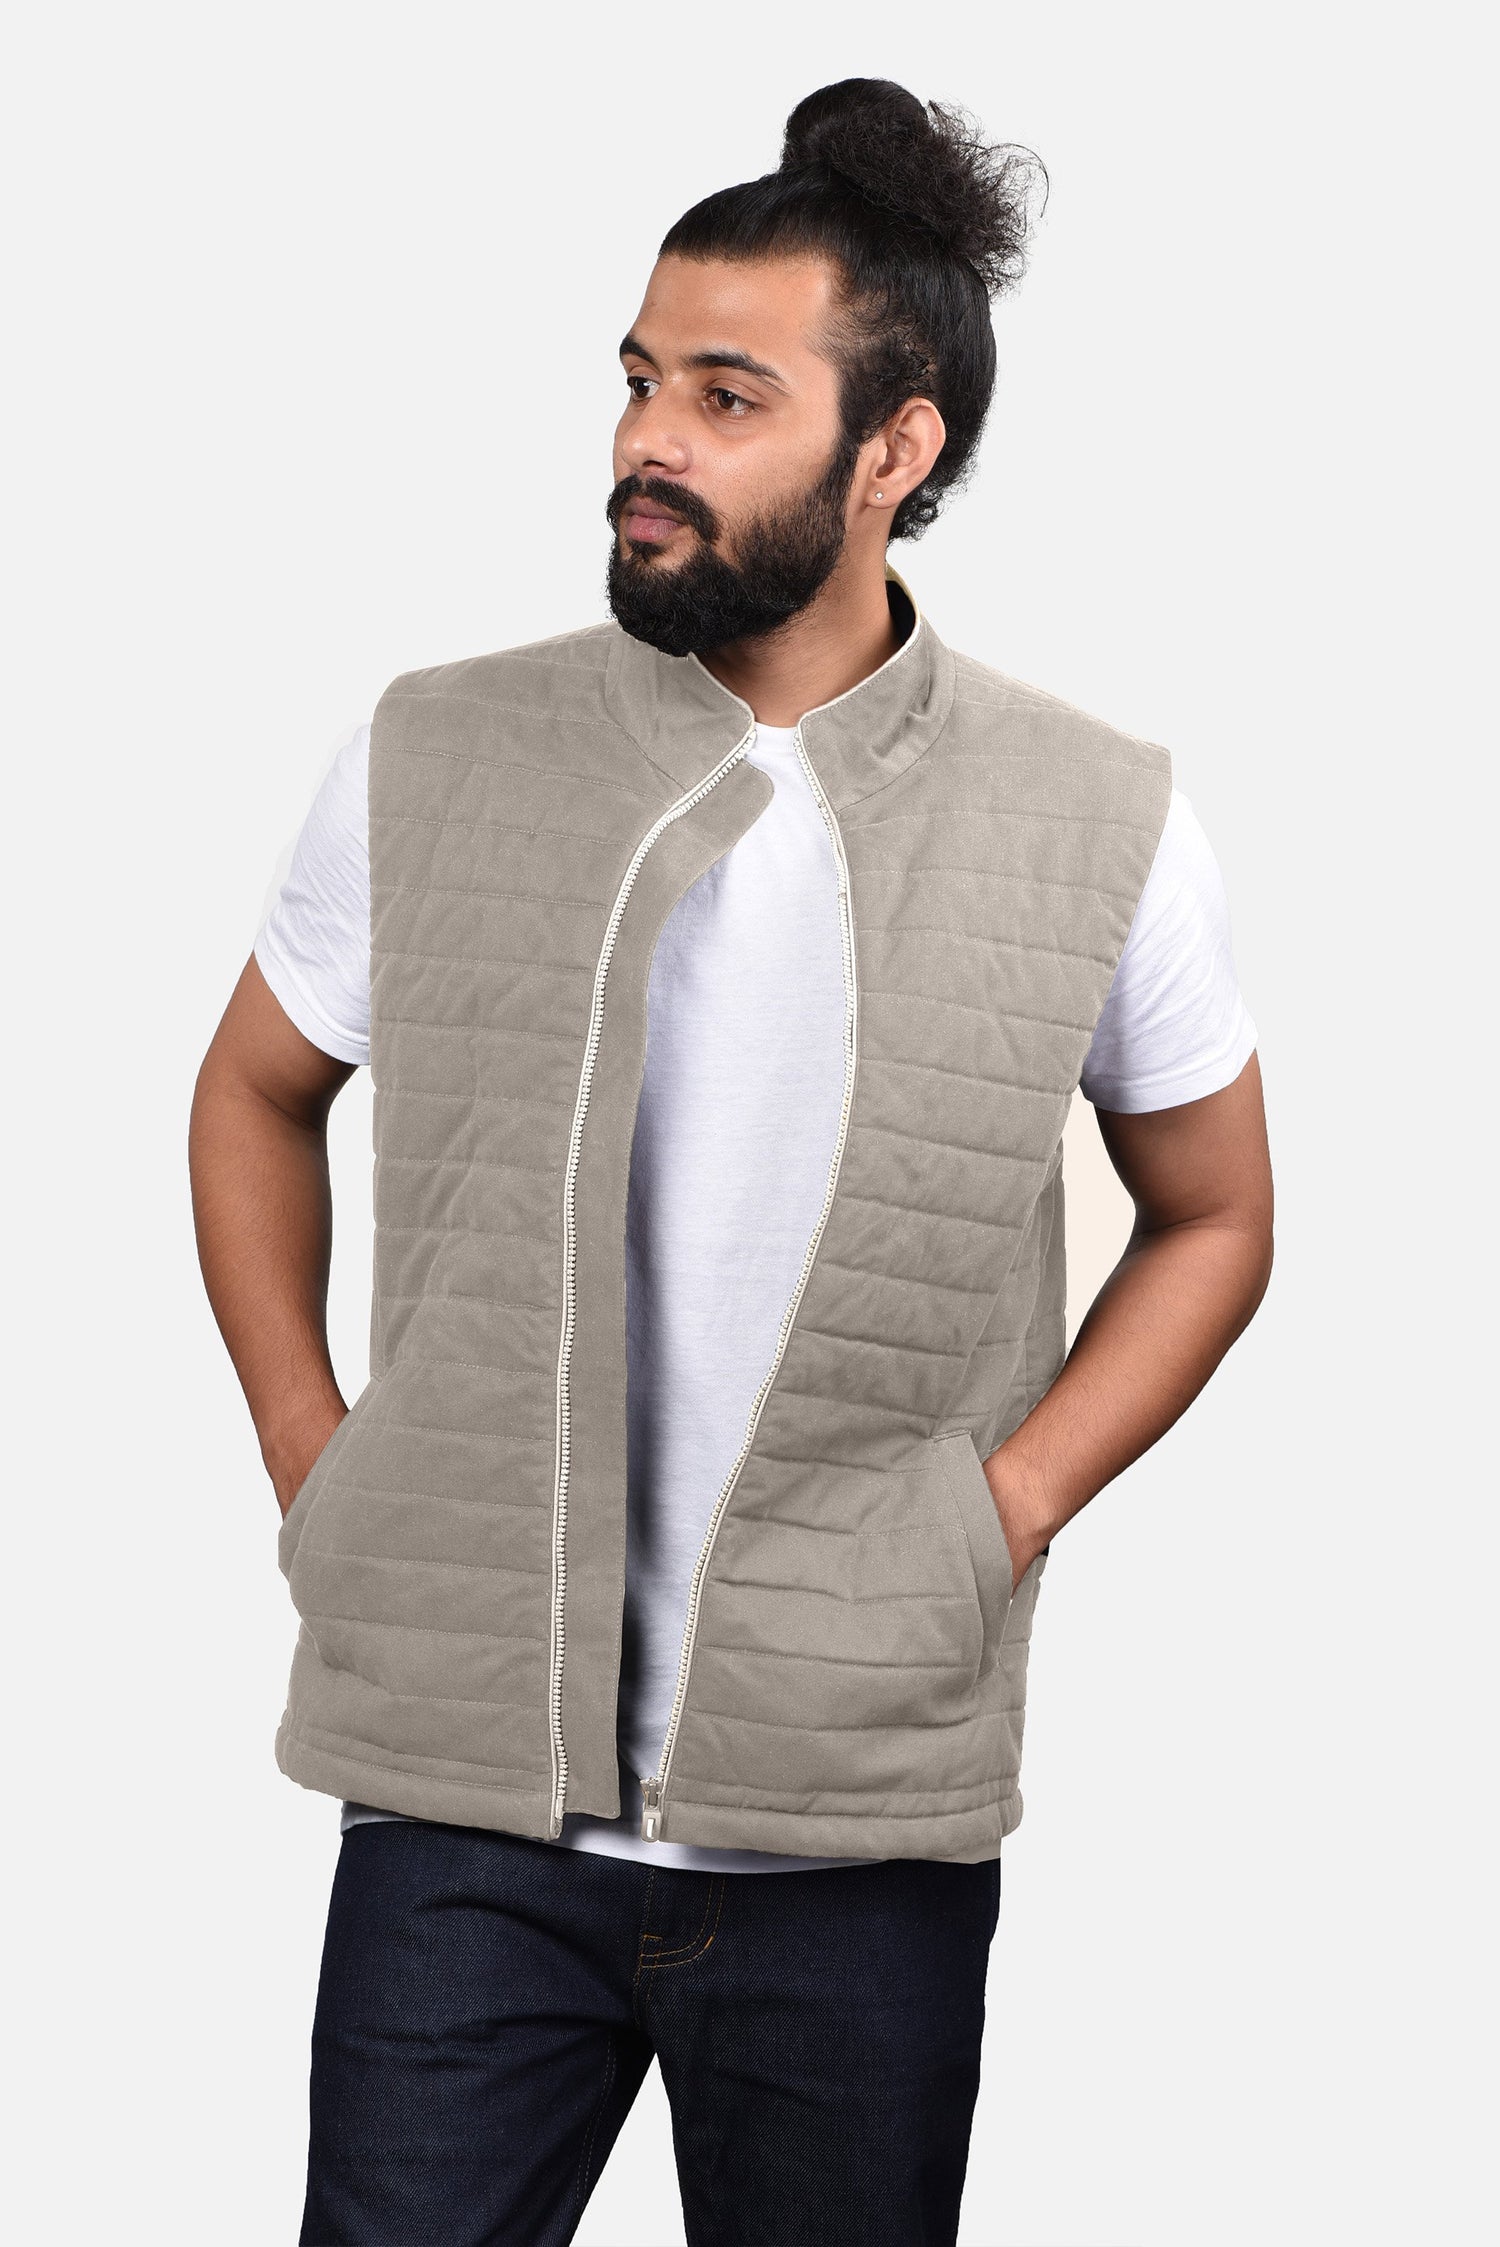 Quilted Gilets in Performance: Light Fade Beige Twill (4334115553335)